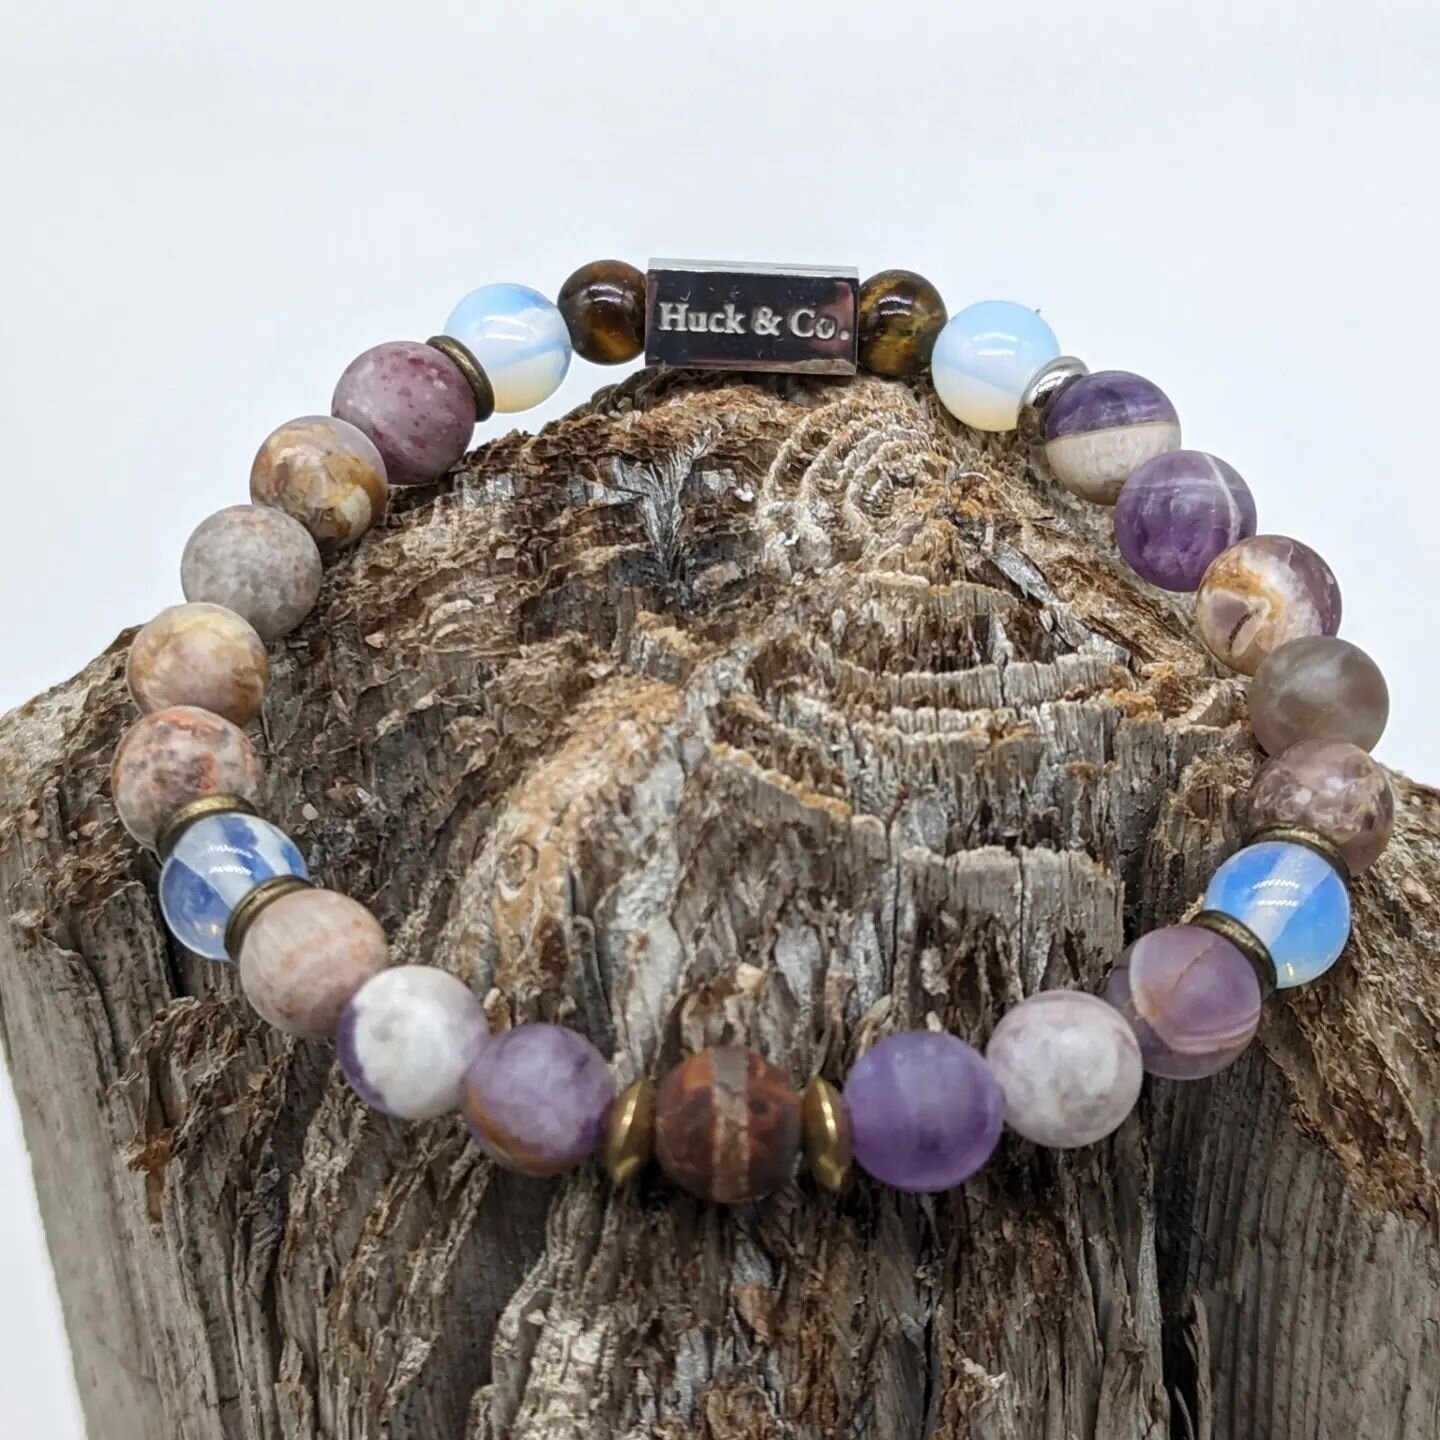 Chevron Amethyst combines the metaphysical powers between Quartz and the stress-relieving properties of Amethyst, lessening ones resistance on your path to self-discovery. This stone is often said to be stronger and more powerful, especially with hig